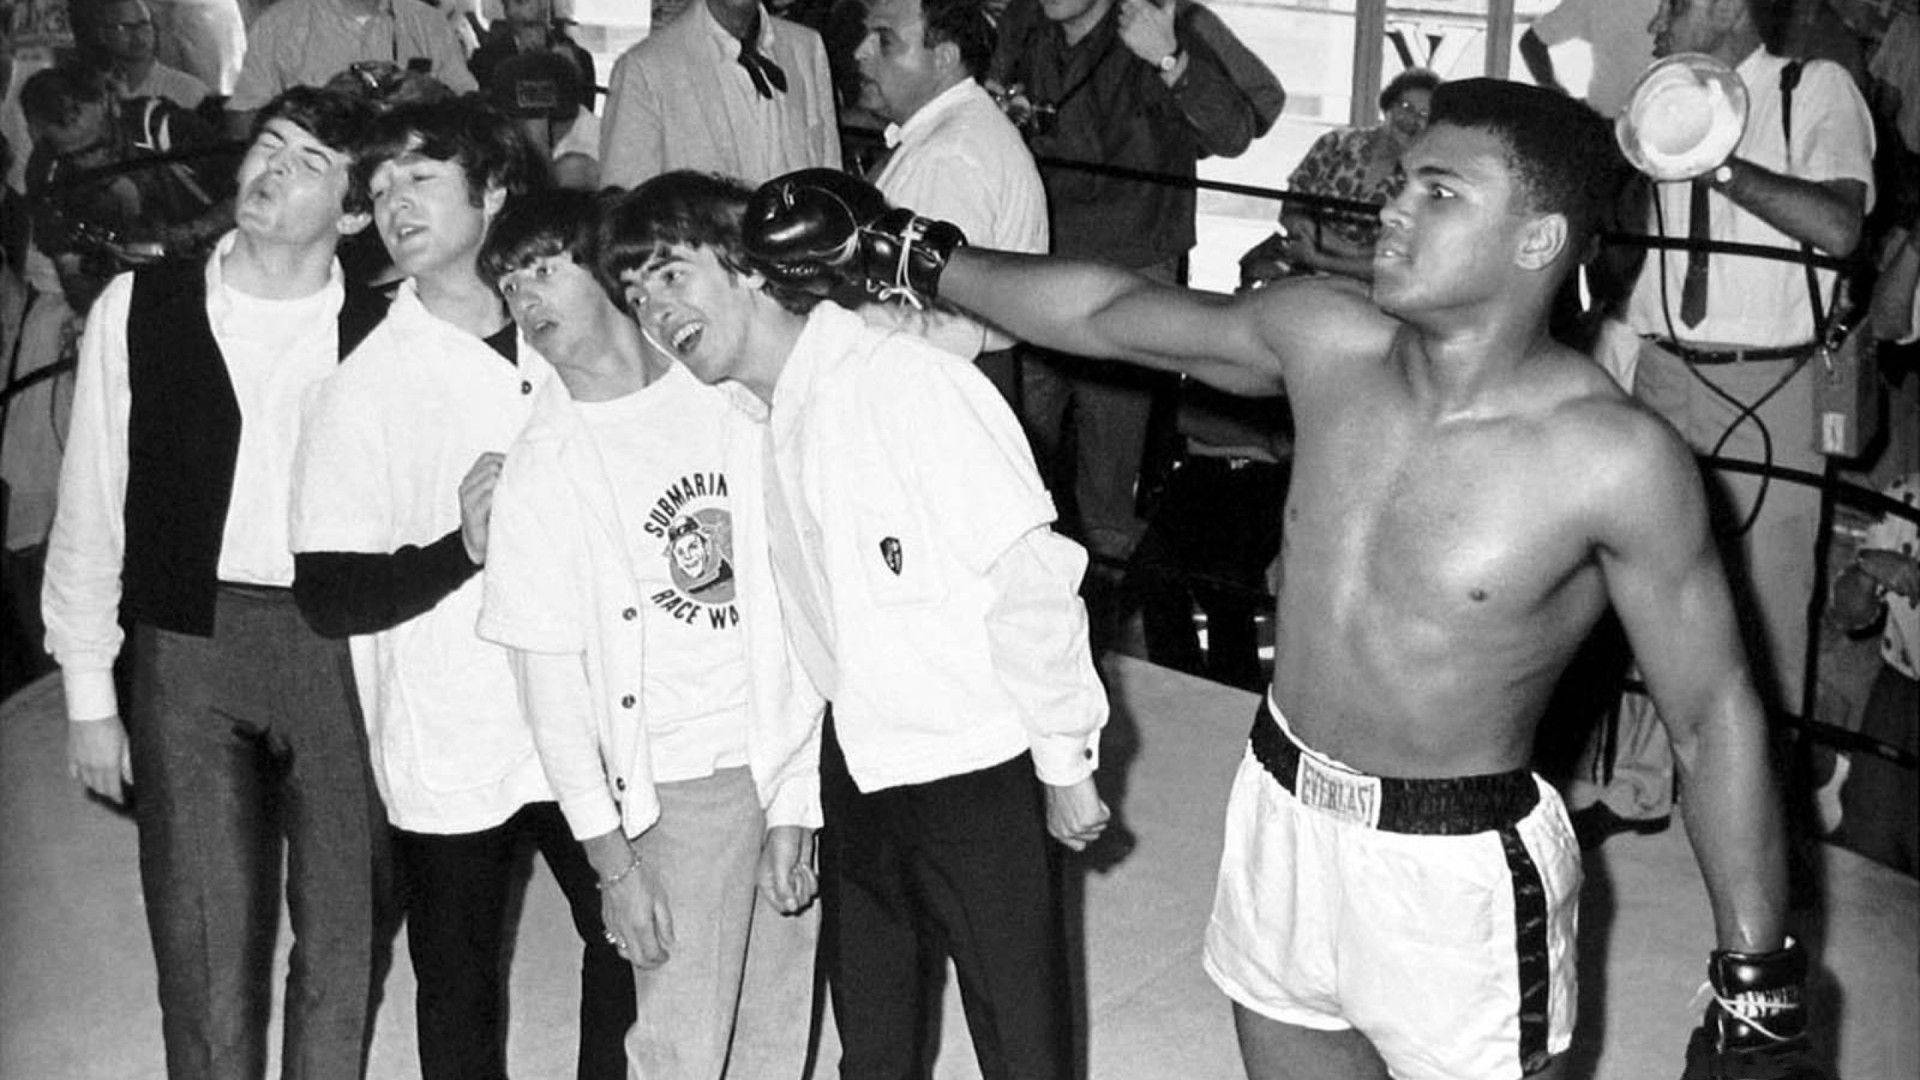 Legends Unite! - Muhammad Ali Poses With The Beatles Background